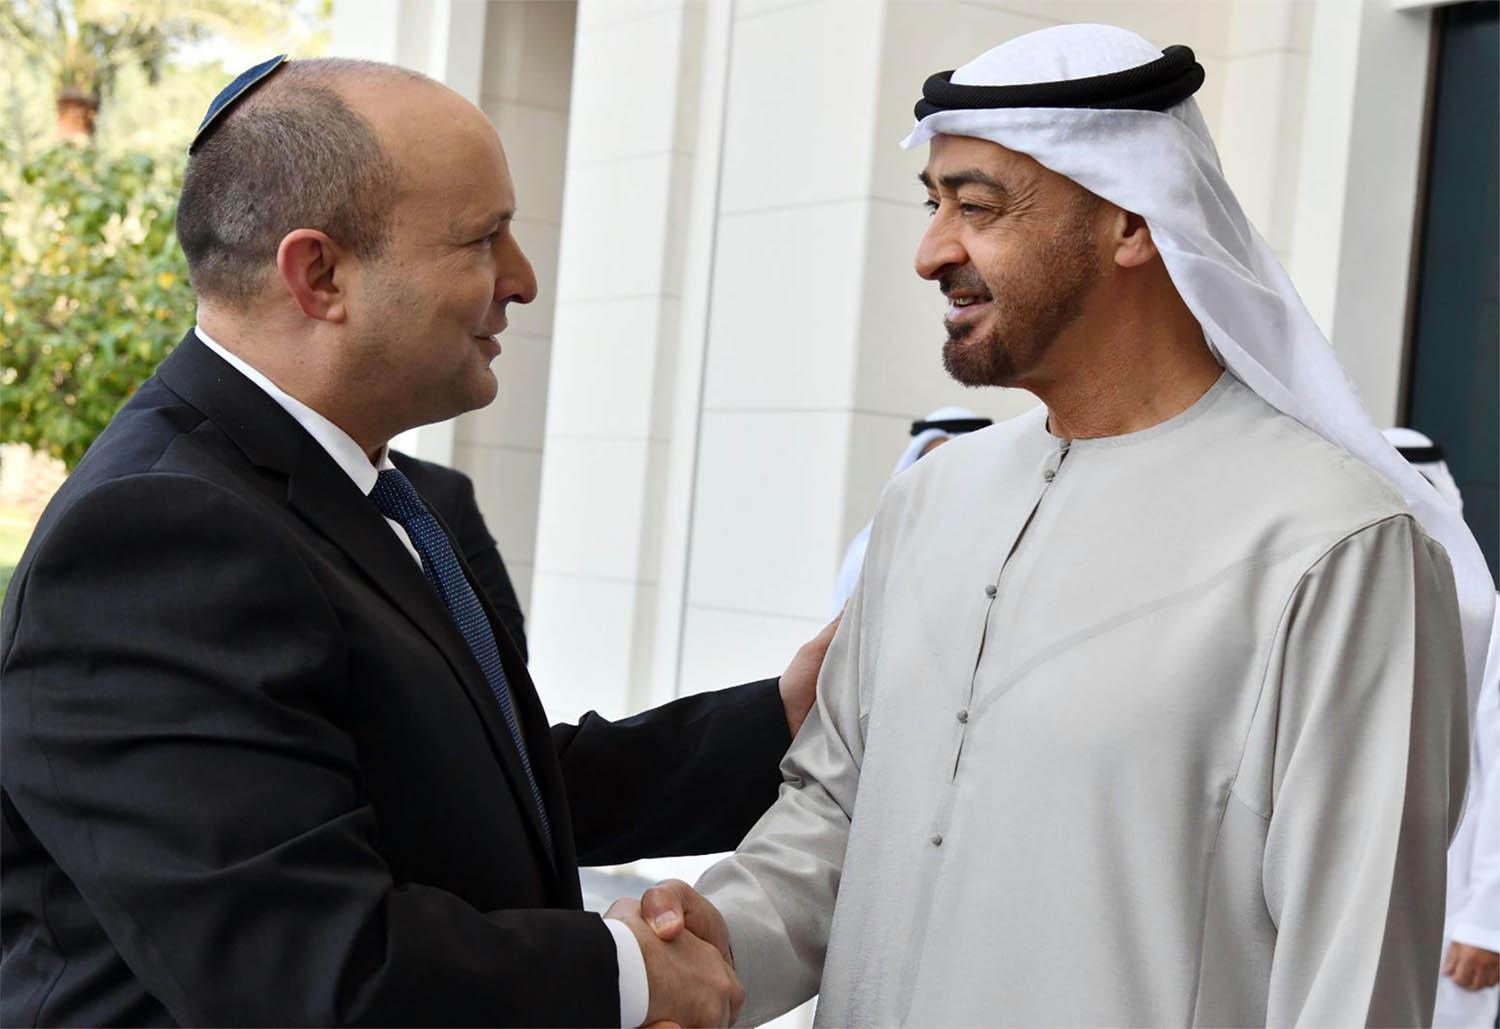 The UAE agreed to normalize relations with Israel in a US-brokered deal in 2020